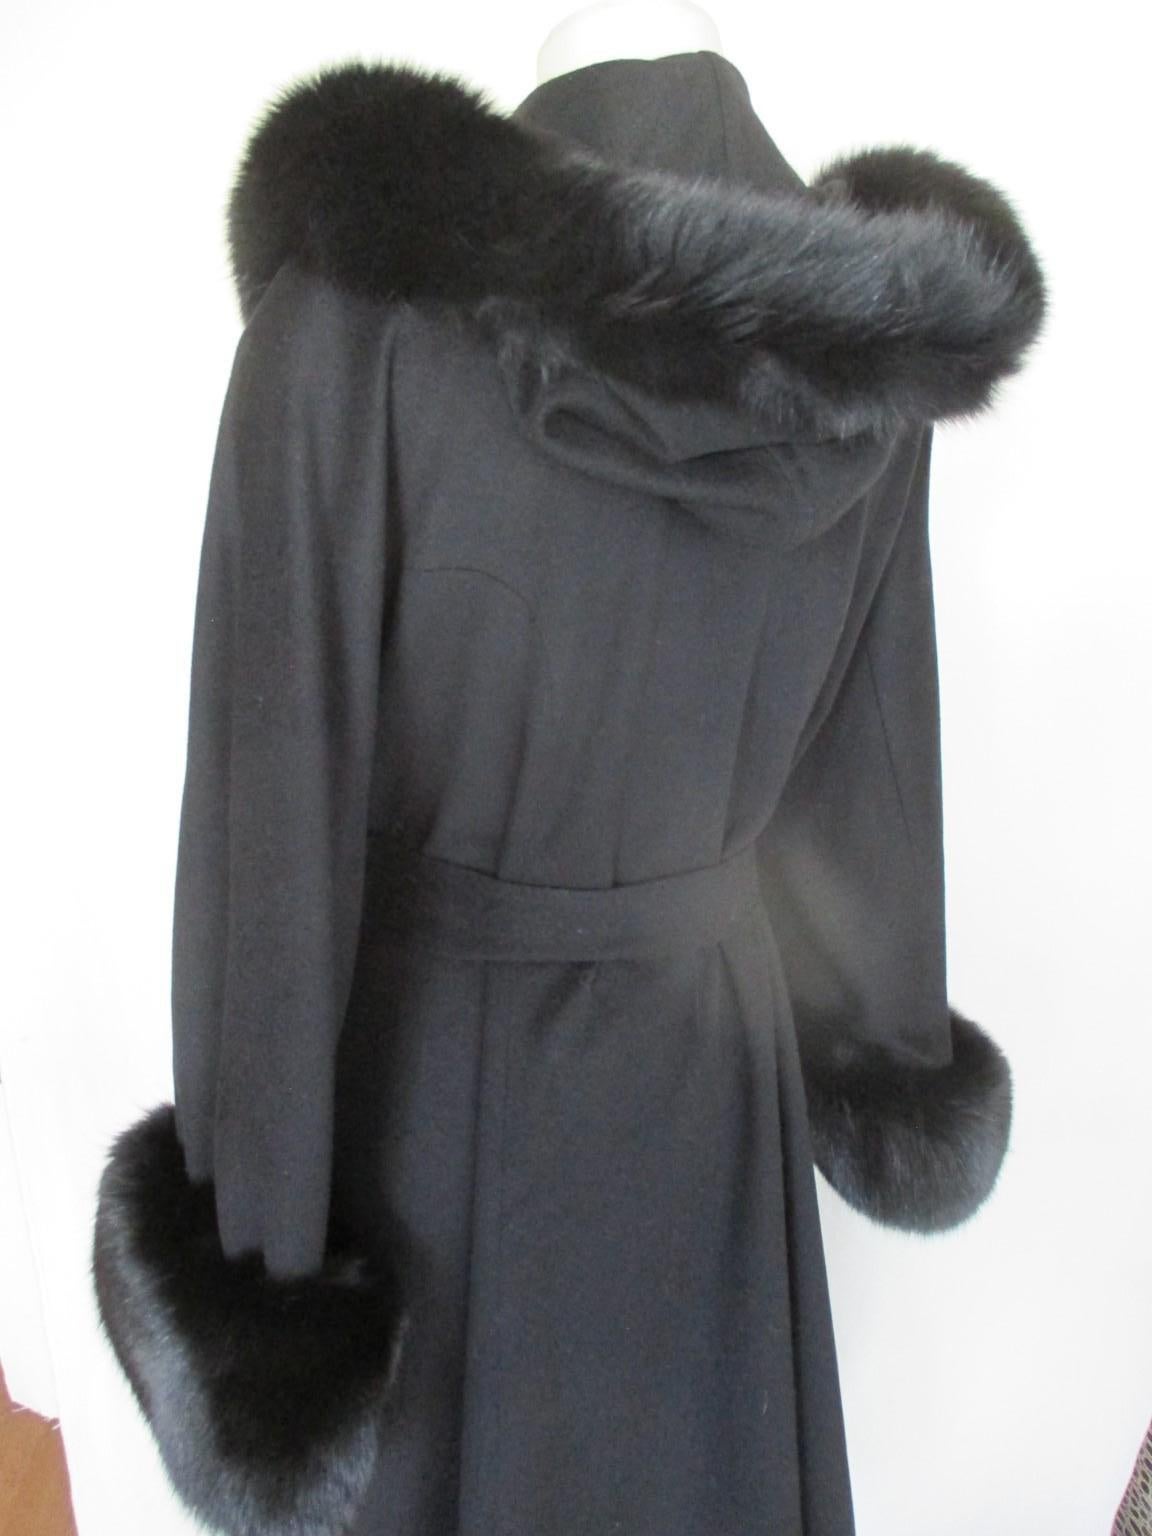  Elegant Black Cashmere Fox Fur Flared Hooded Coat In Excellent Condition For Sale In Amsterdam, NL